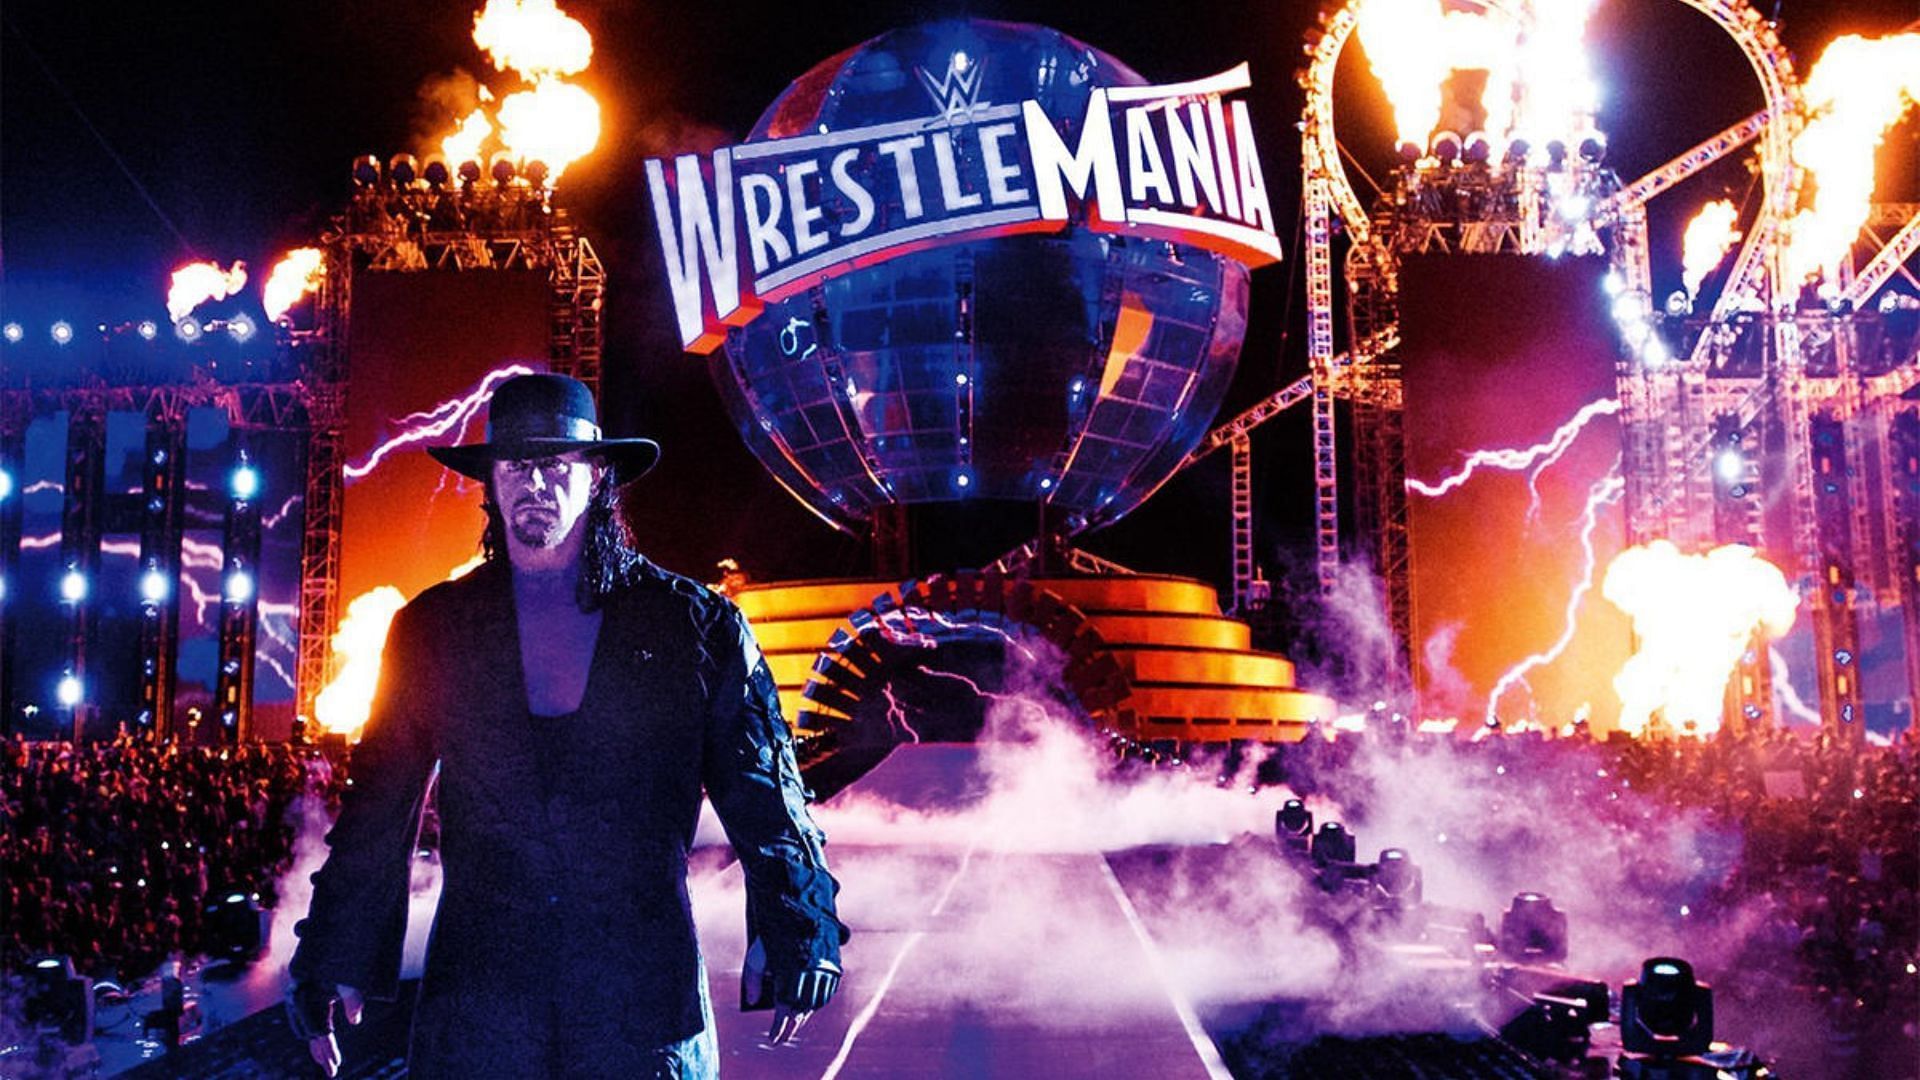 The Undertaker is one of the greatest WrestleMania performers of all time